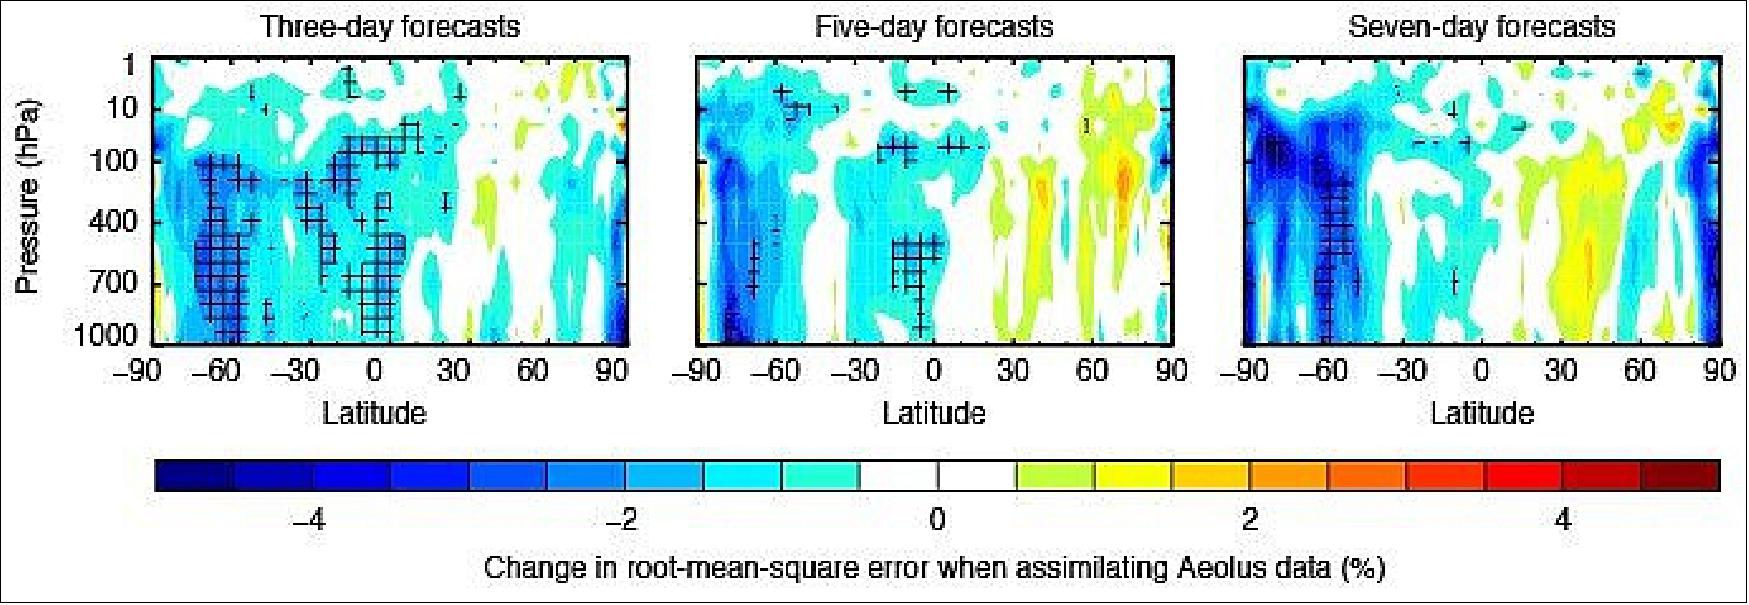 Figure 29: These plots show how the assimilation of Aeolus data reduces wind forecast errors (blue shading) in large parts of the southern hemisphere and the tropics throughout the troposphere and beyond (10 hPa corresponds to about 30 km altitude). In the northern hemisphere, forecasts improve mainly in the polar region. Cross-hatching indicates statistical significance at the 95% level. The experiment covers the period from 2 August to 18 October 2019 (image credit: ESA/ECMWF)